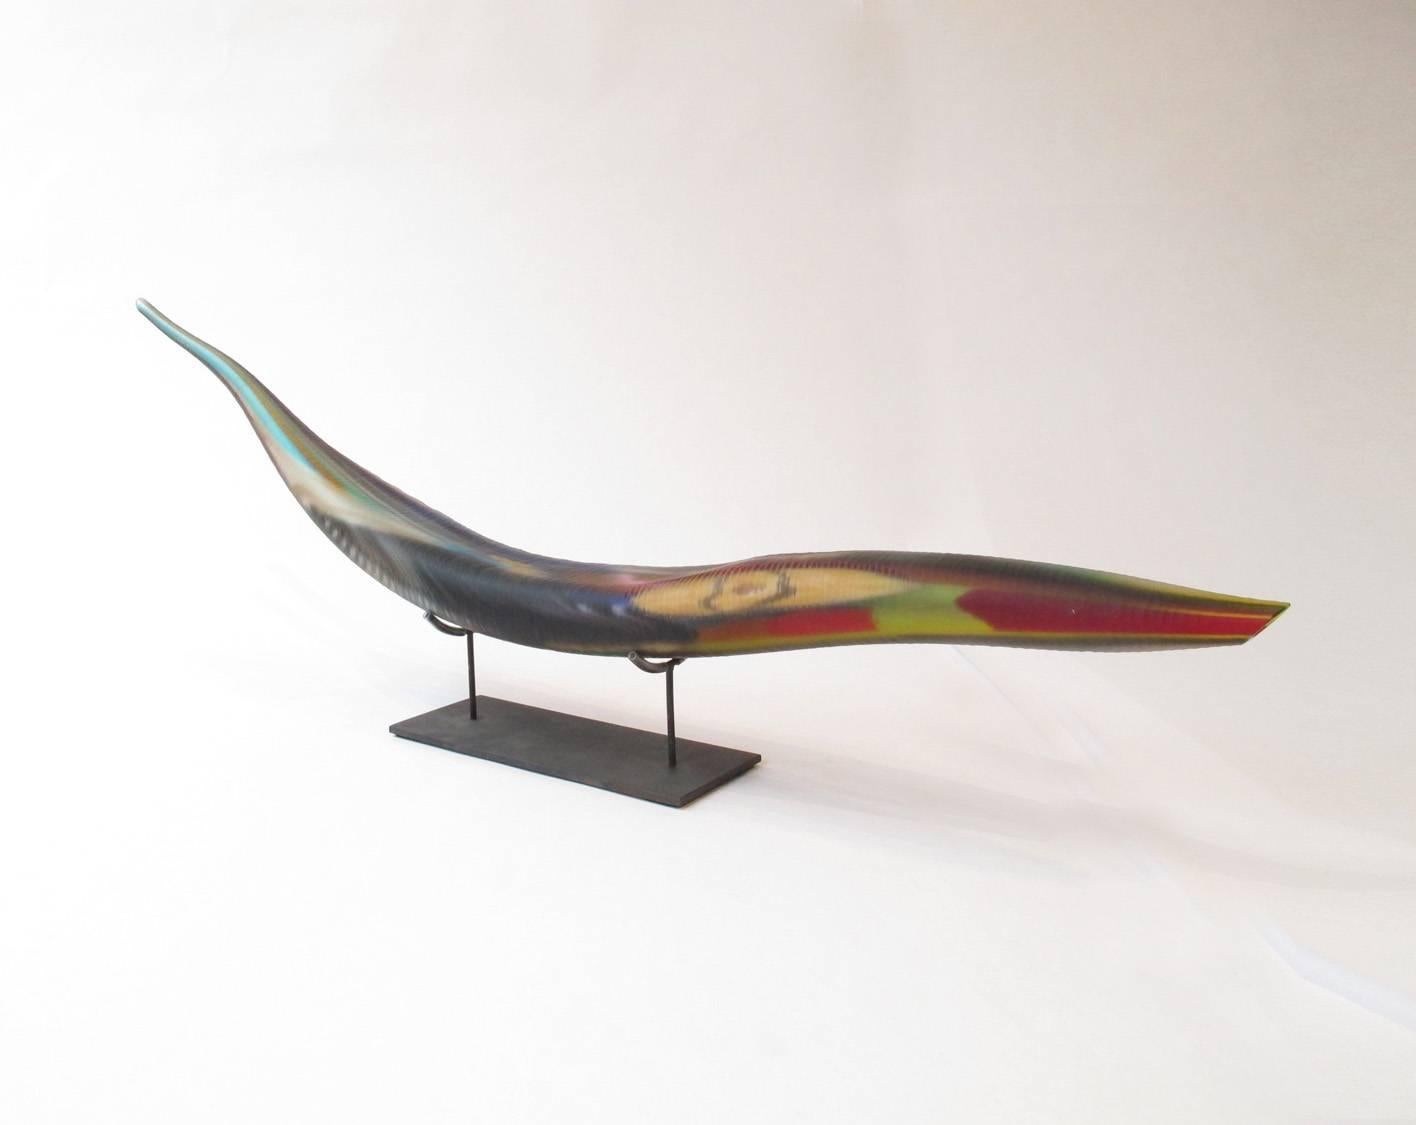 Venice III is a glass sculpture by Alessandro Casson.

Alessandro Casson thinks up and designs his pieces, then to make them, he works with various master glassblowers and craftsmen (smiths, carpenters, glass cold workers).

His vision is to advance